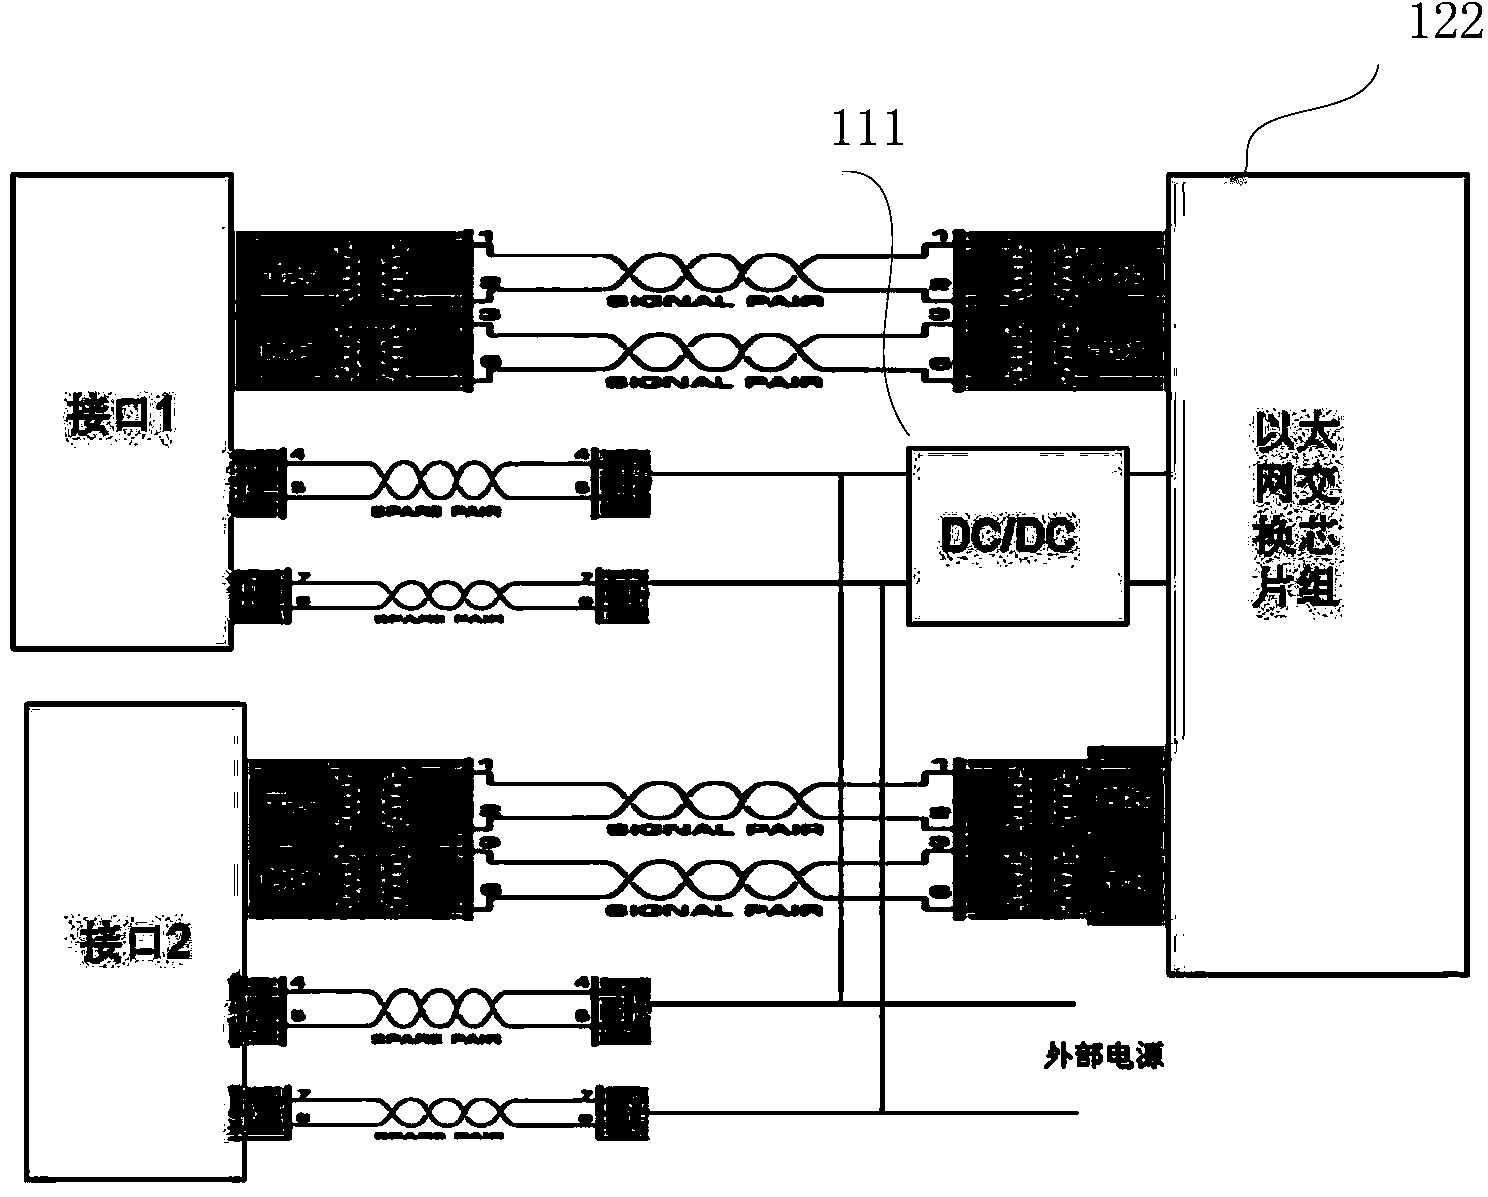 Cascaded synchronous large-scale data collecting system based on network and distributed type power supply